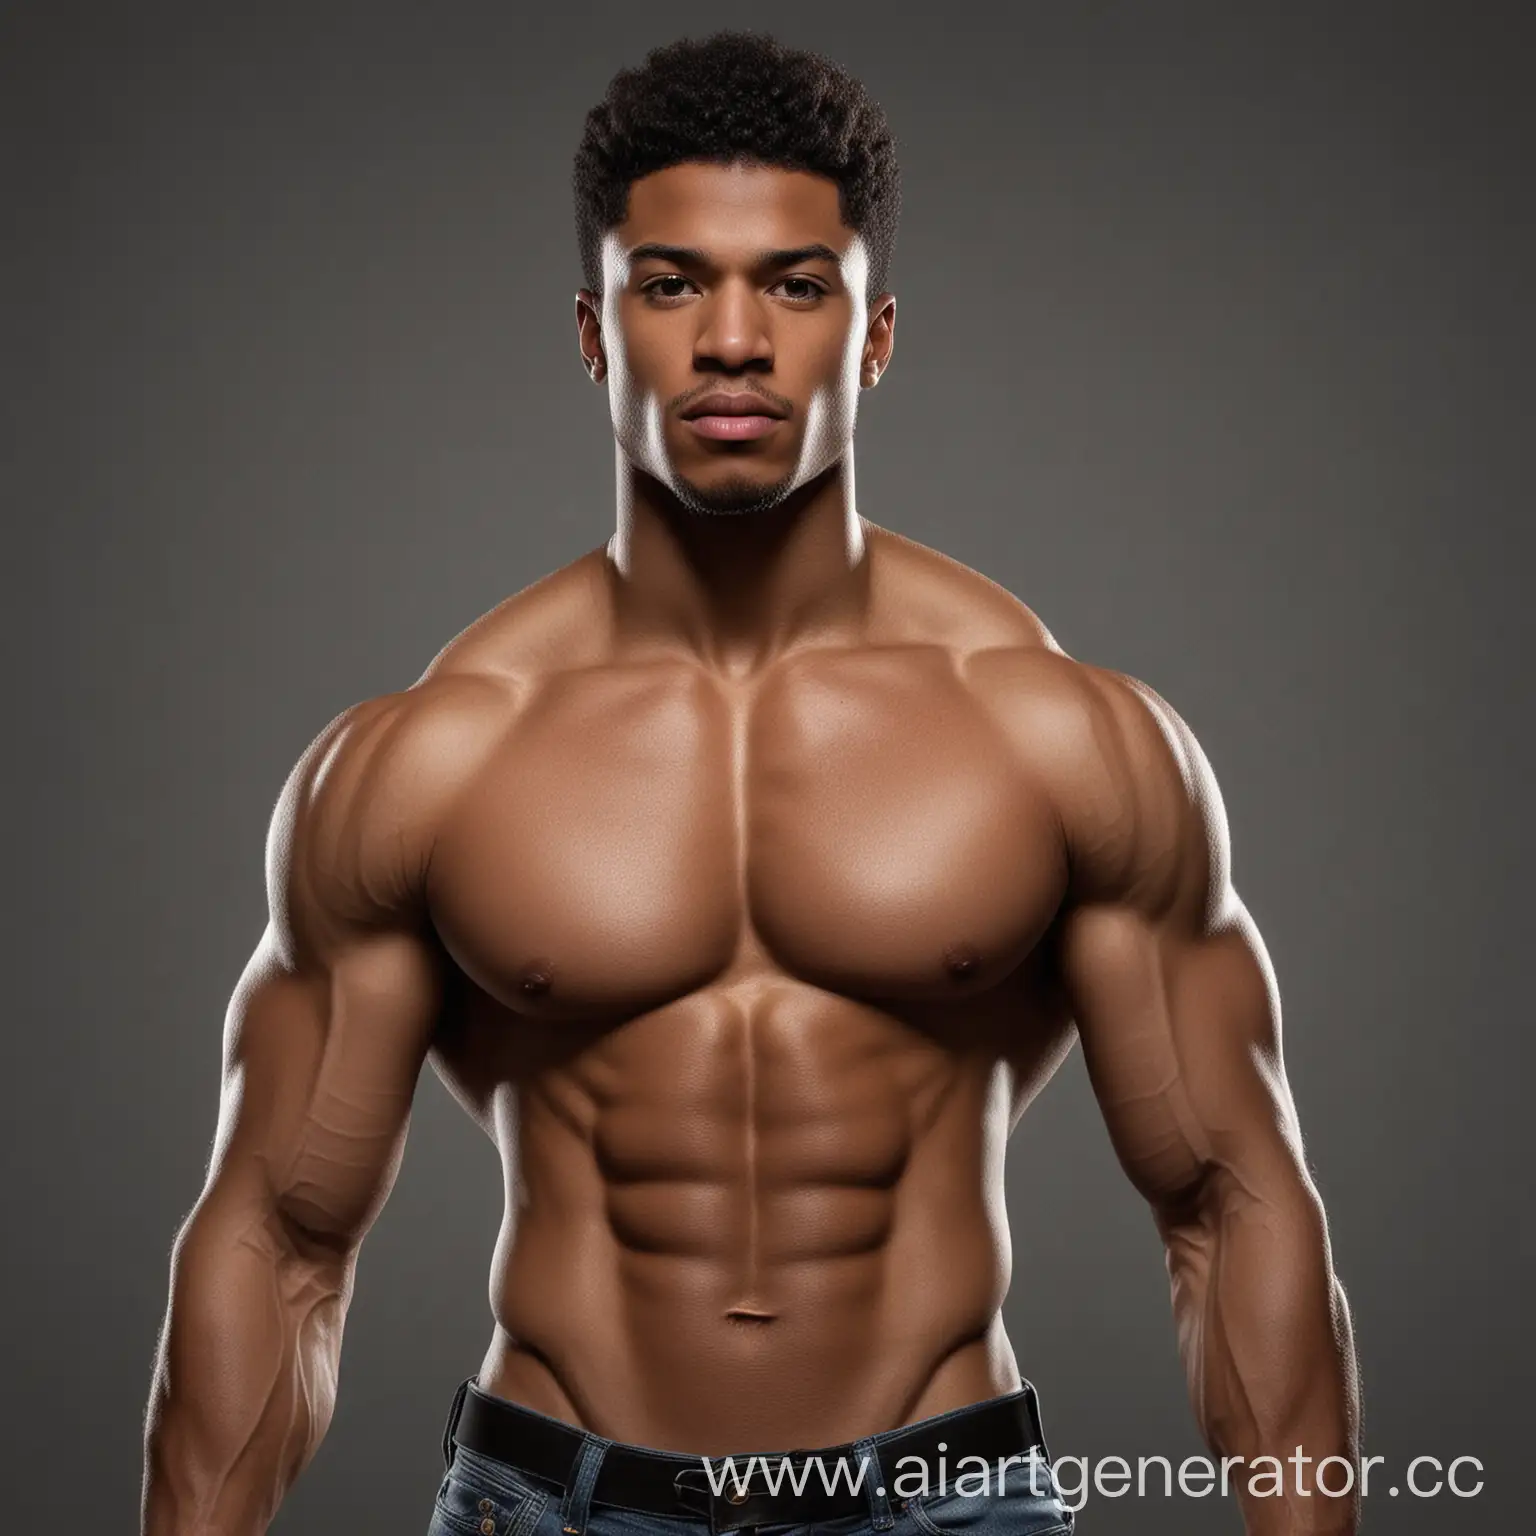 Cinematic-Still-Photorealistic-Portrait-of-a-Young-AfroLatino-Man-with-Muscular-Physique